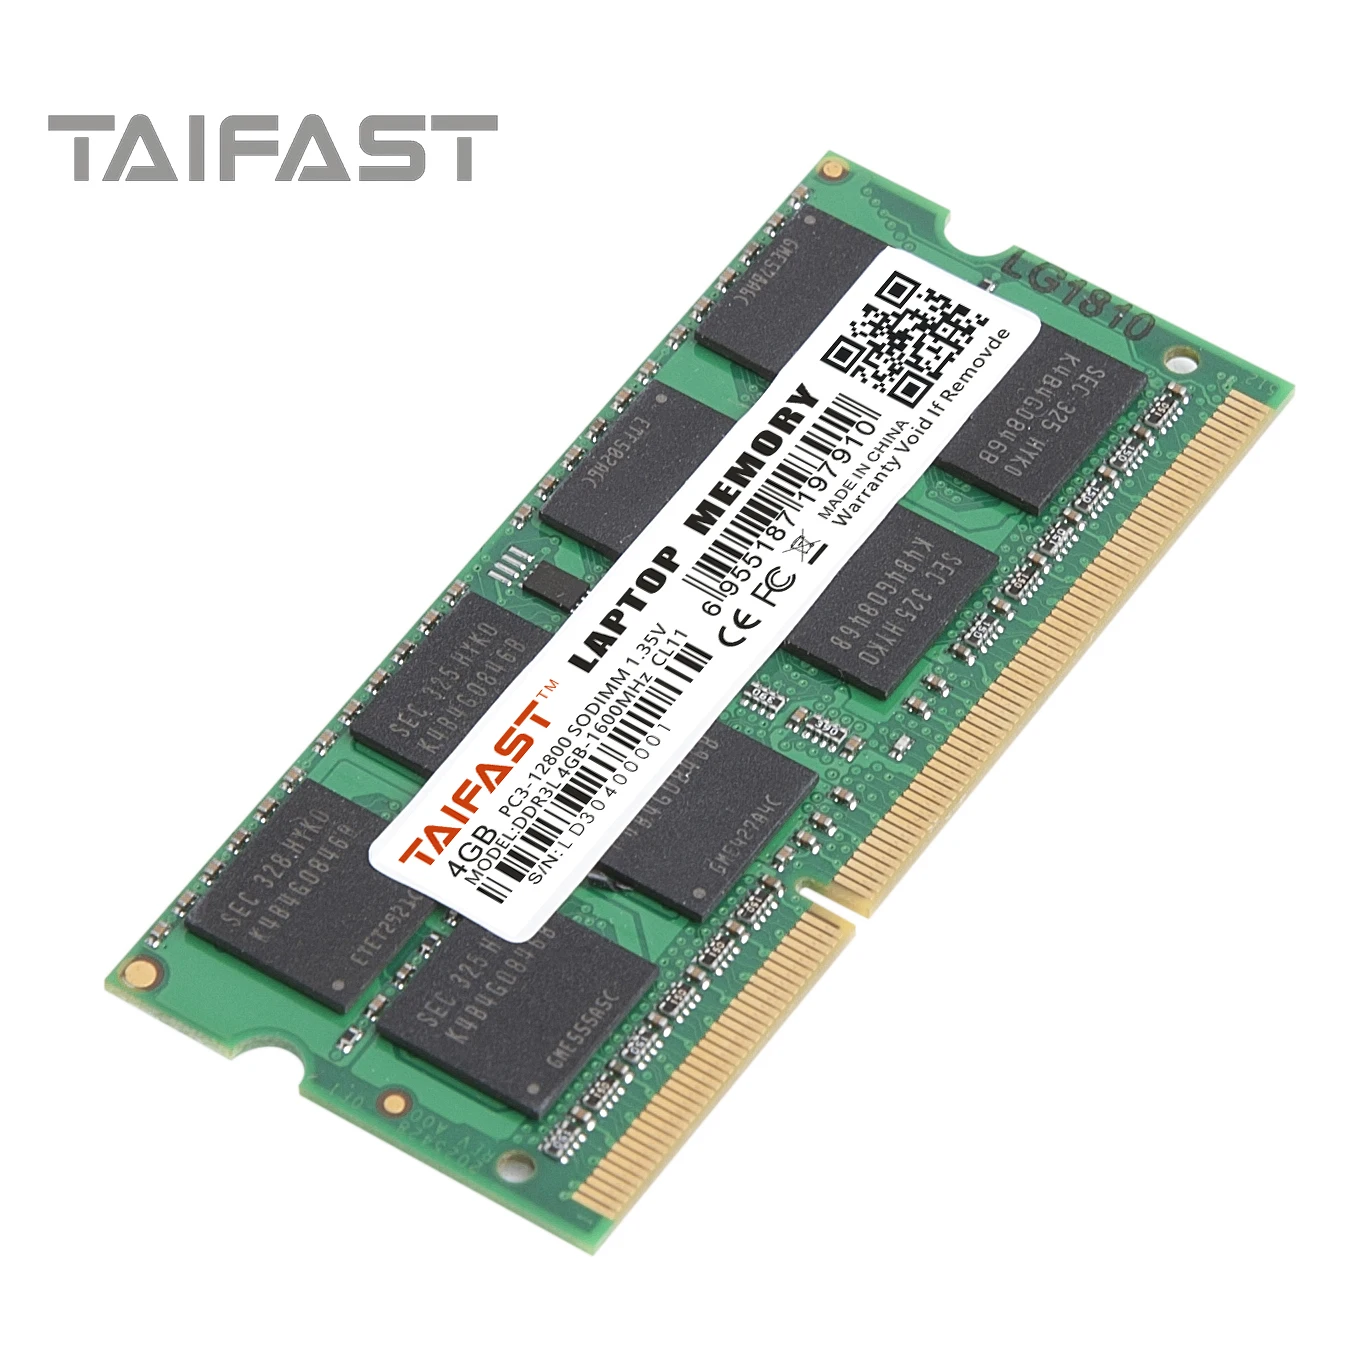 spontan TRUE Konsekvenser Wholesale 2GB/4GB/8GB/16GB 1333MHZ/1600MHZ Laptop DDR3 Taifast Memory Ram  For Notebook Computer Factory Outlet Negotiable High Quality From  m.alibaba.com